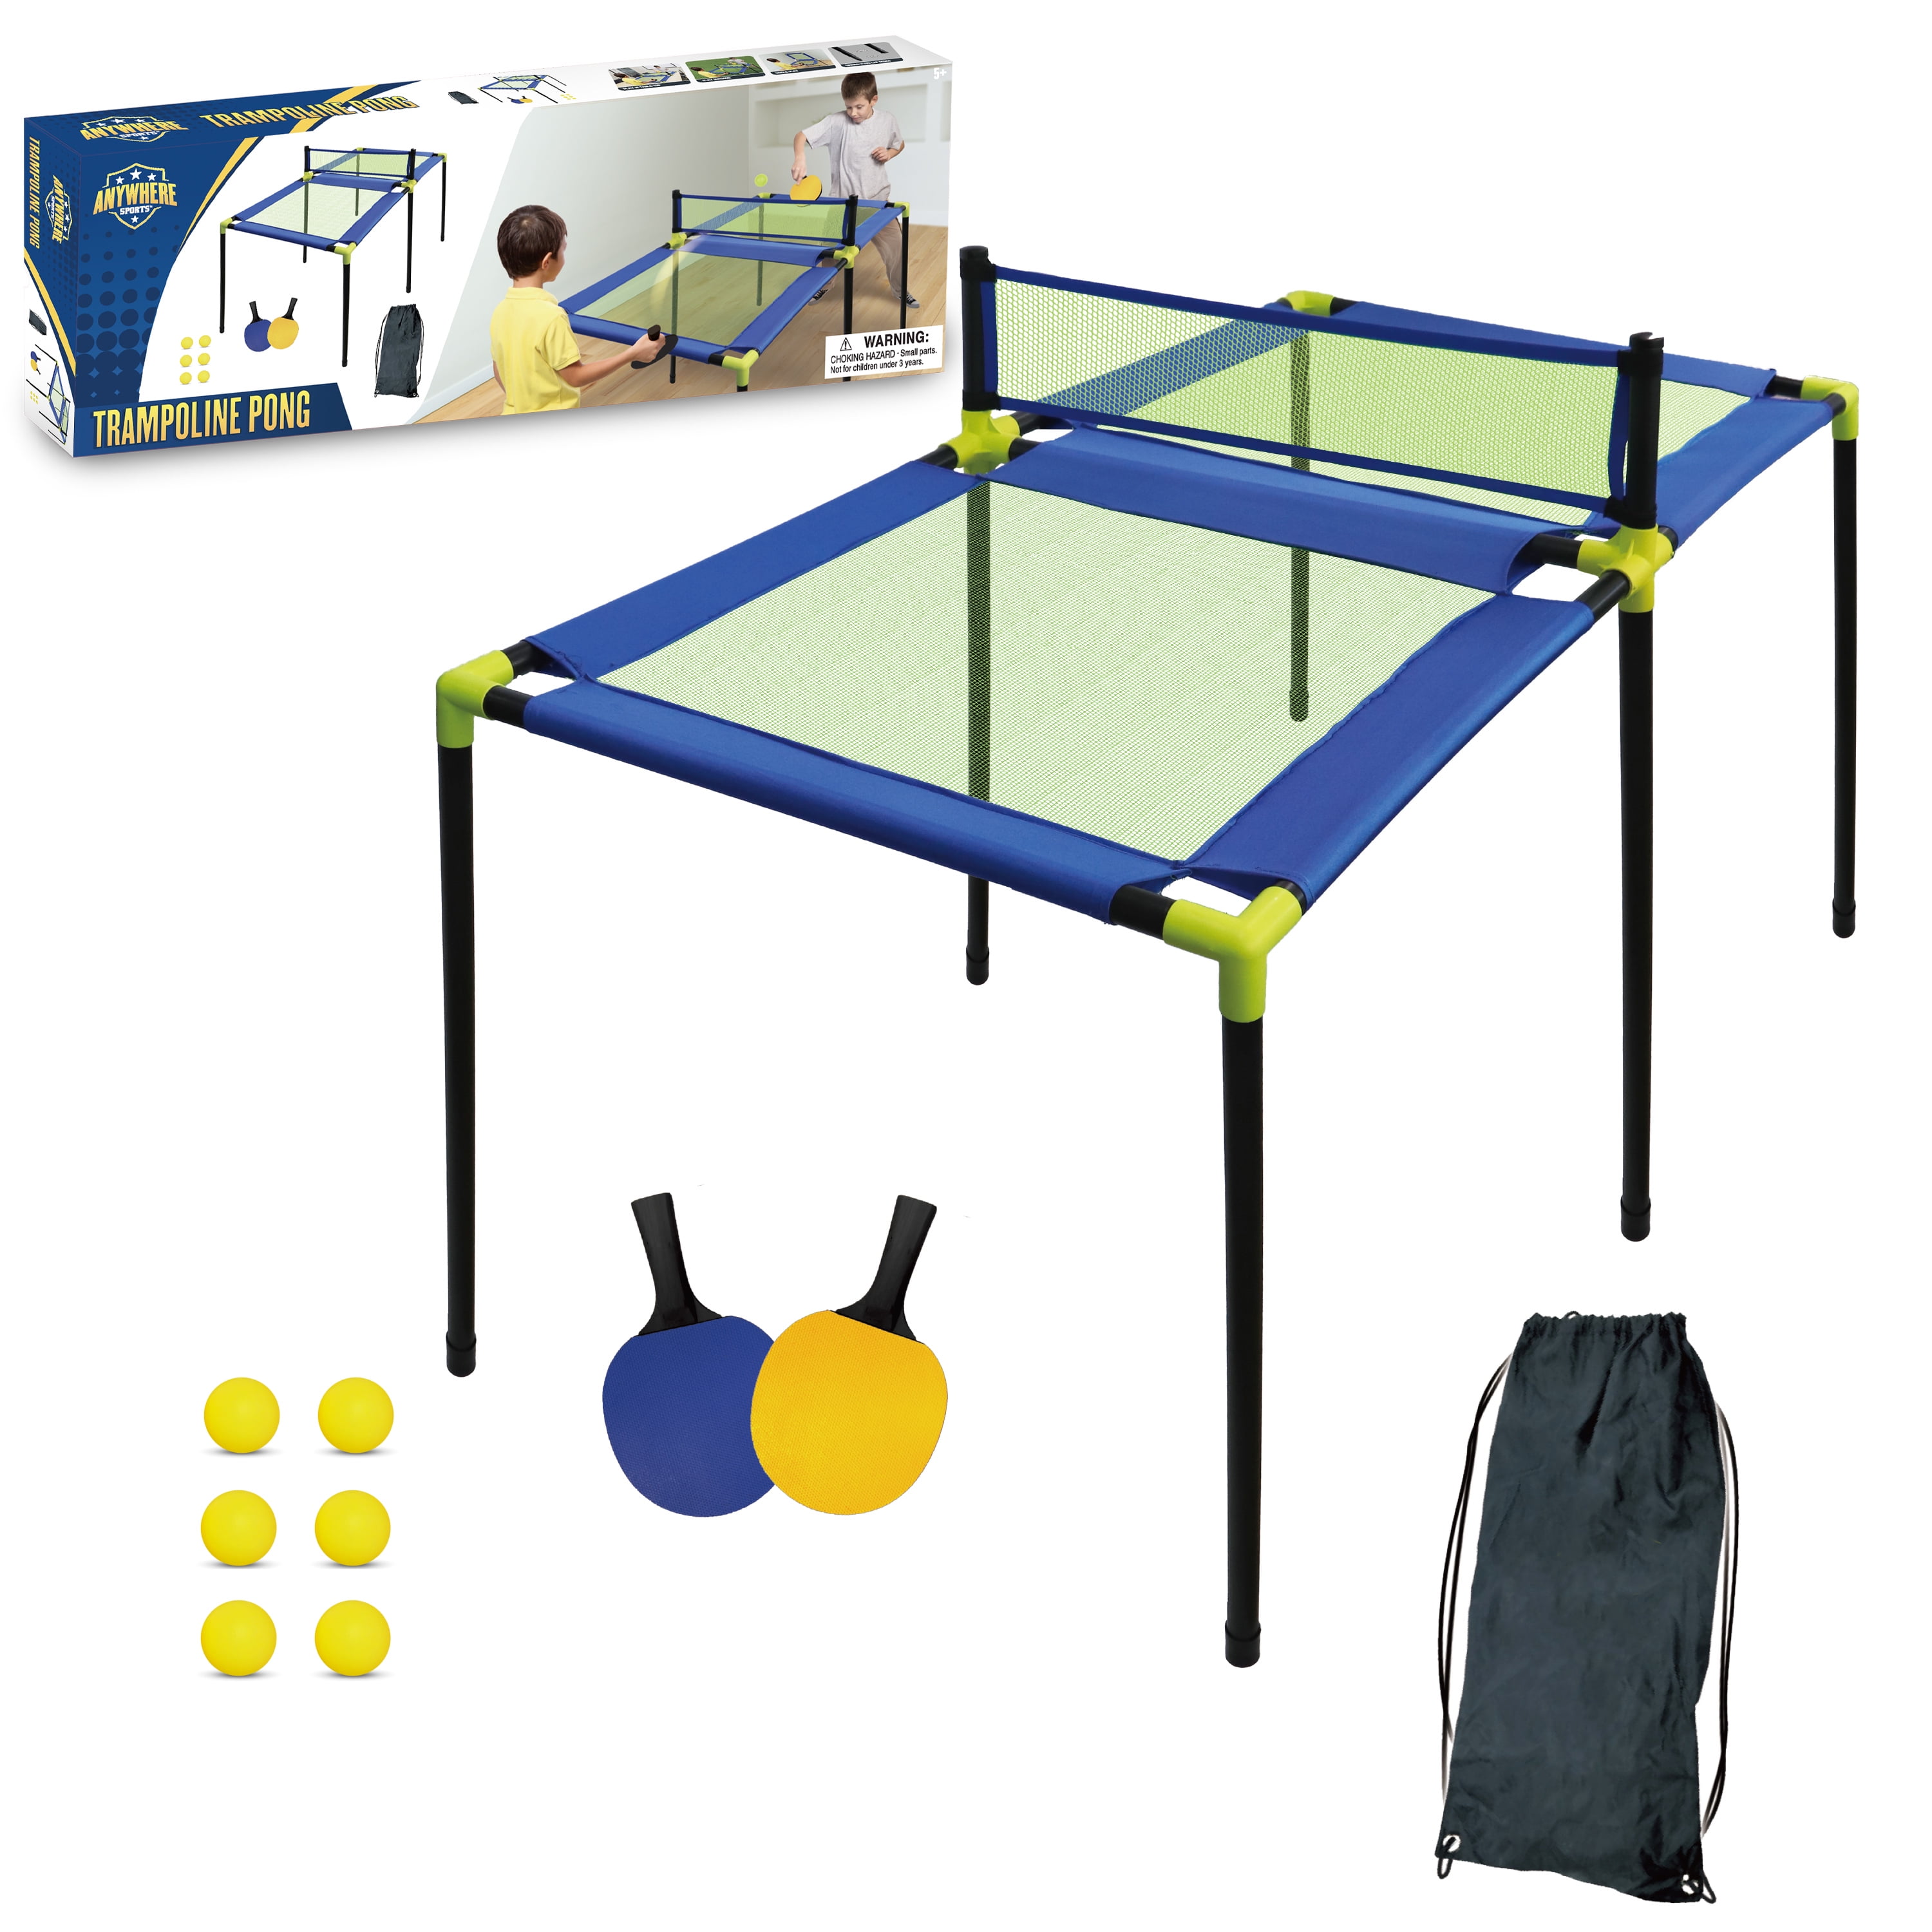 Goplus Foldable Ping Pong Table, 100% Preassembled, Portable Table Tennis  Table Game Set with Net, 2 Table Tennis Paddles and Ping Pong Balls for  Indoor Outdoor Use